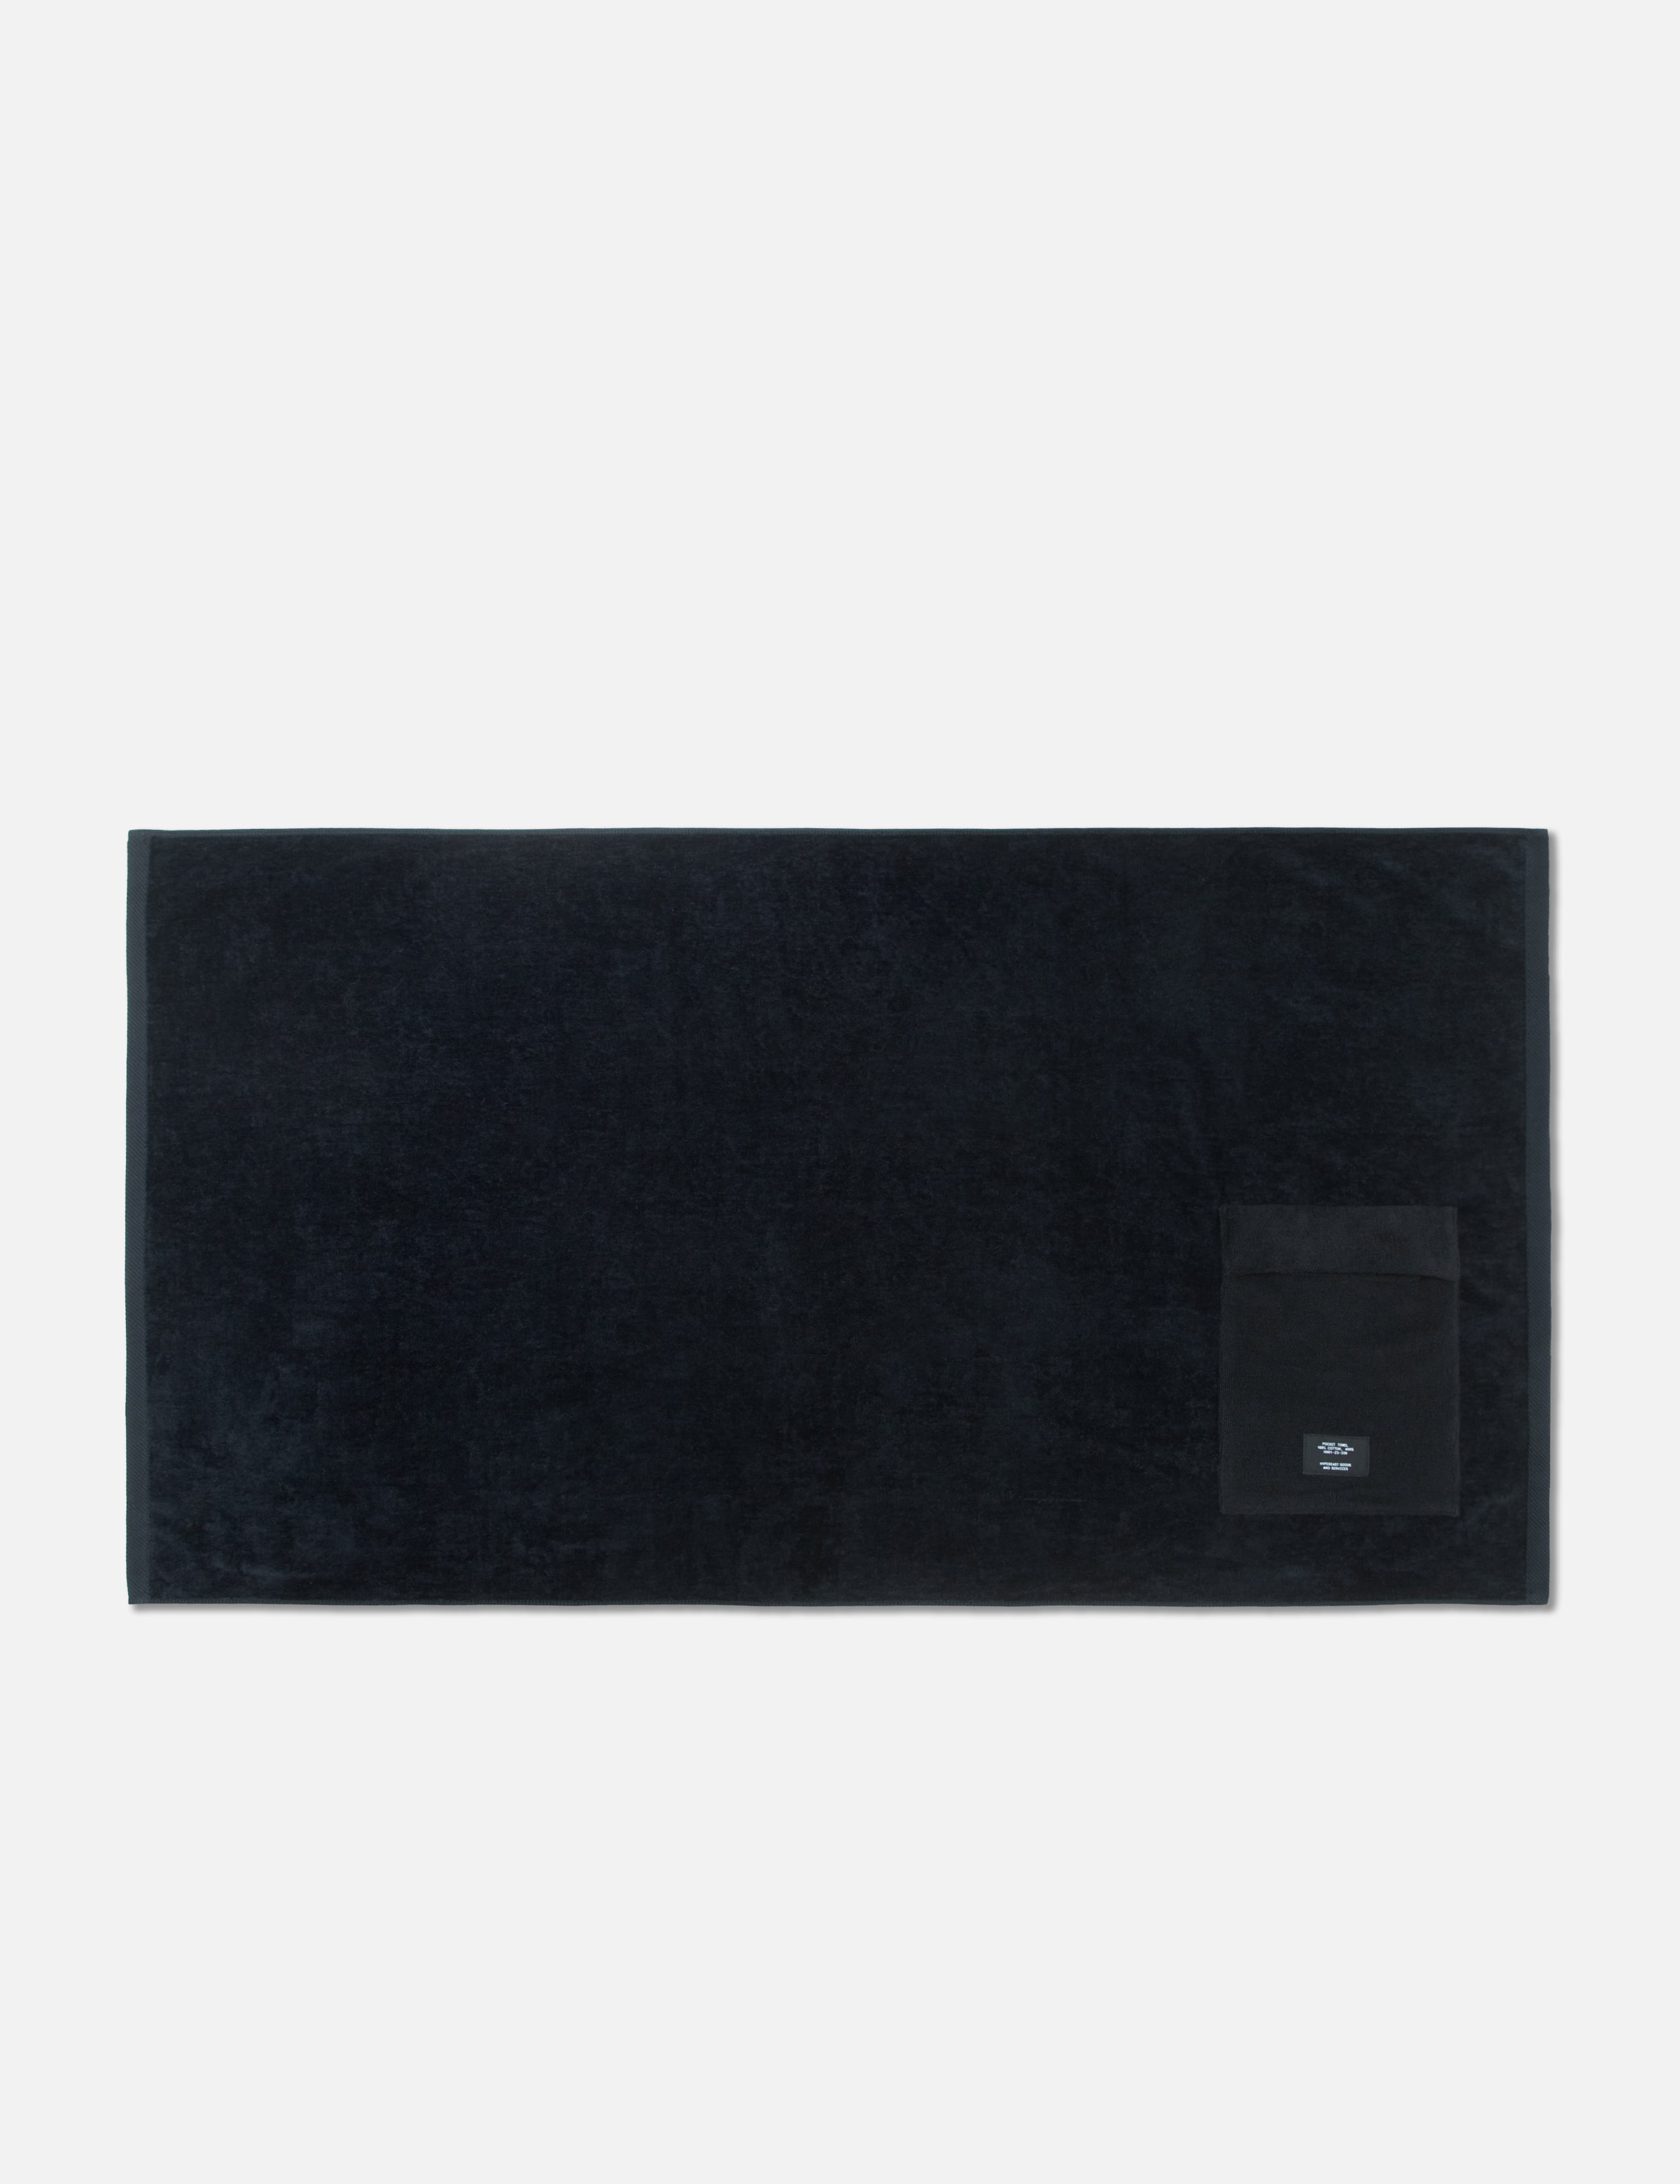 Human Made - Heart Rug - Large | HBX - Globally Curated Fashion